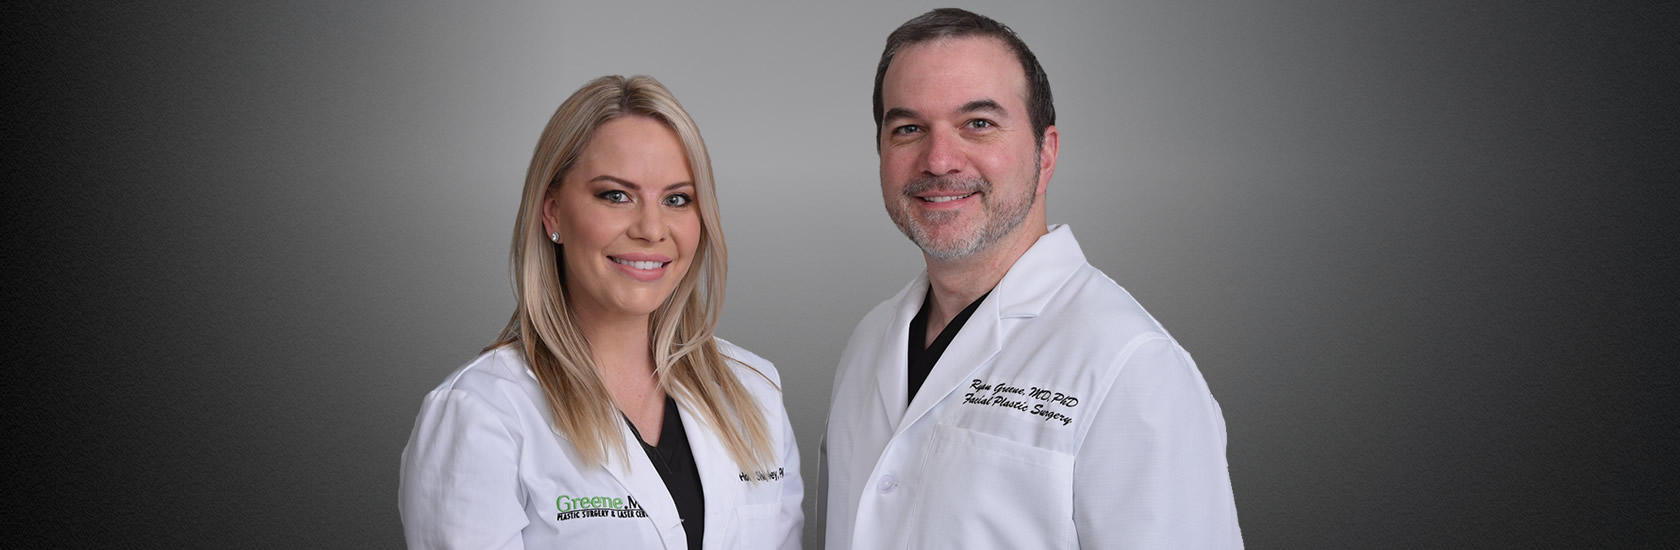 Expert Facial plastic Surgeon and Expert National Fillers and Botox Injector Weston, Fort Lauderdale and Miami, FL